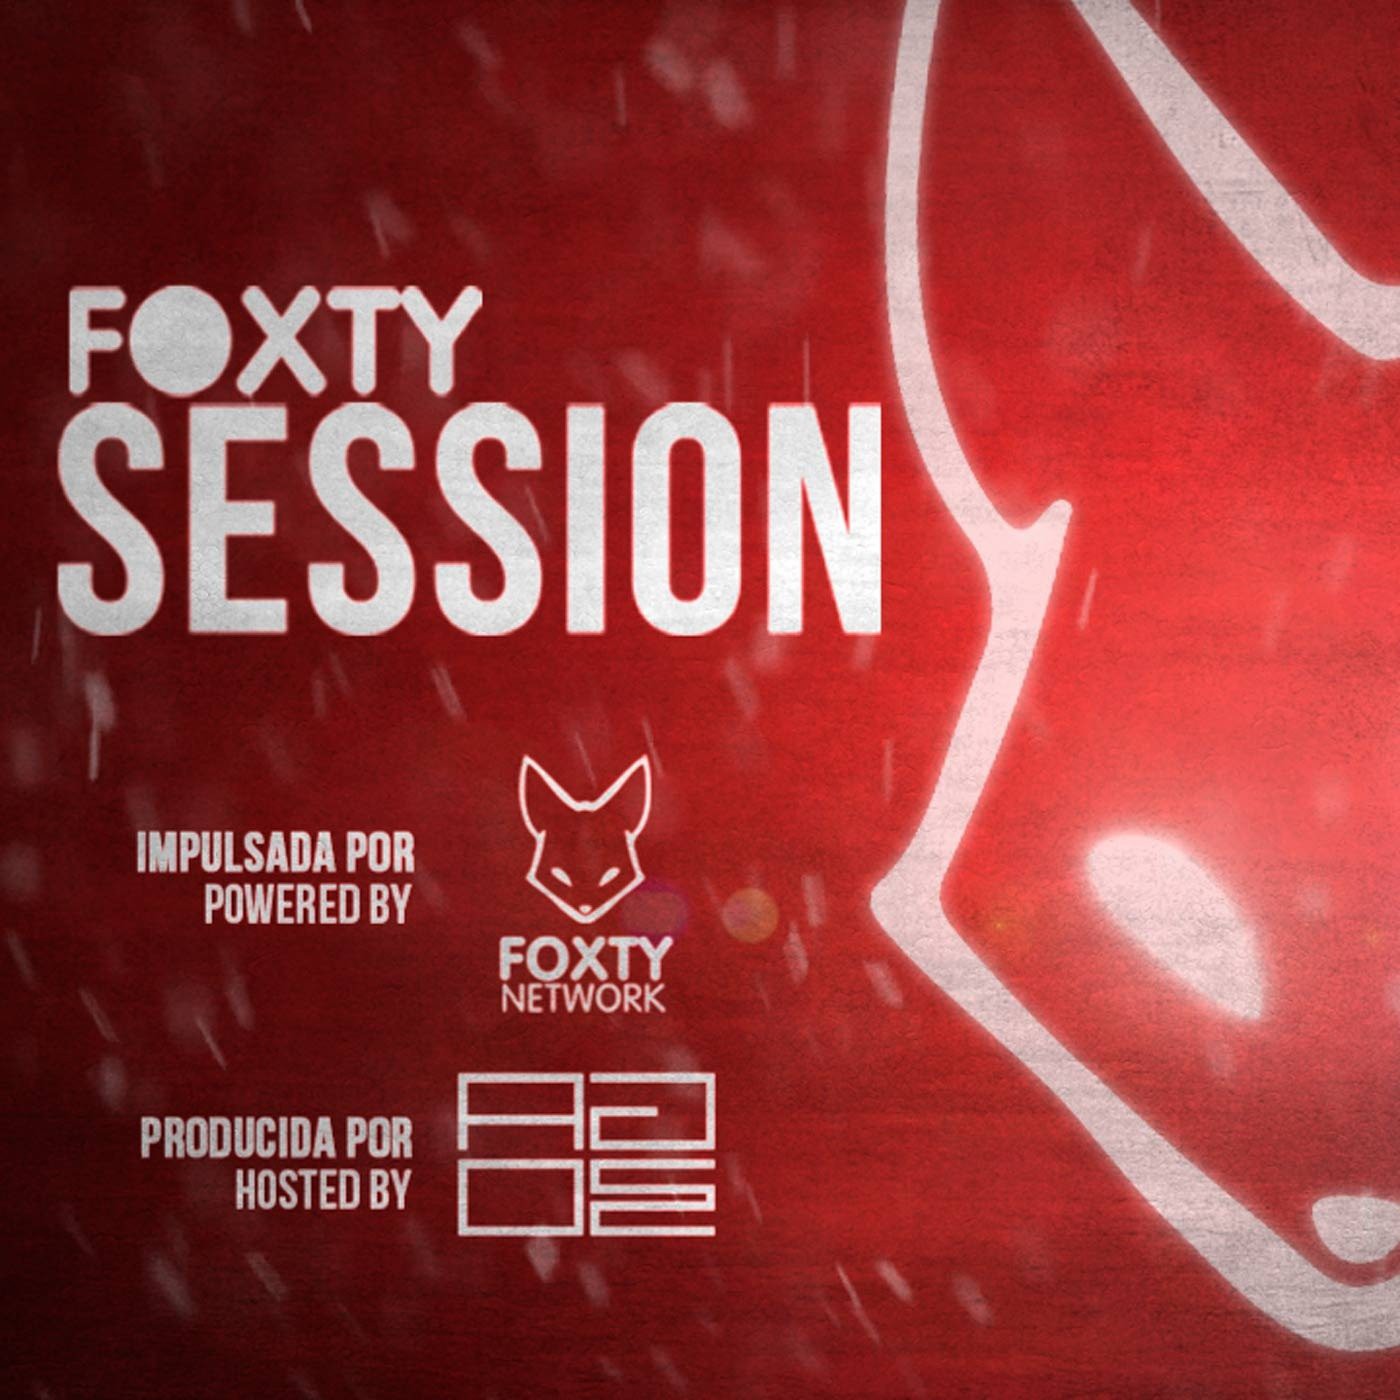 Foxty Session